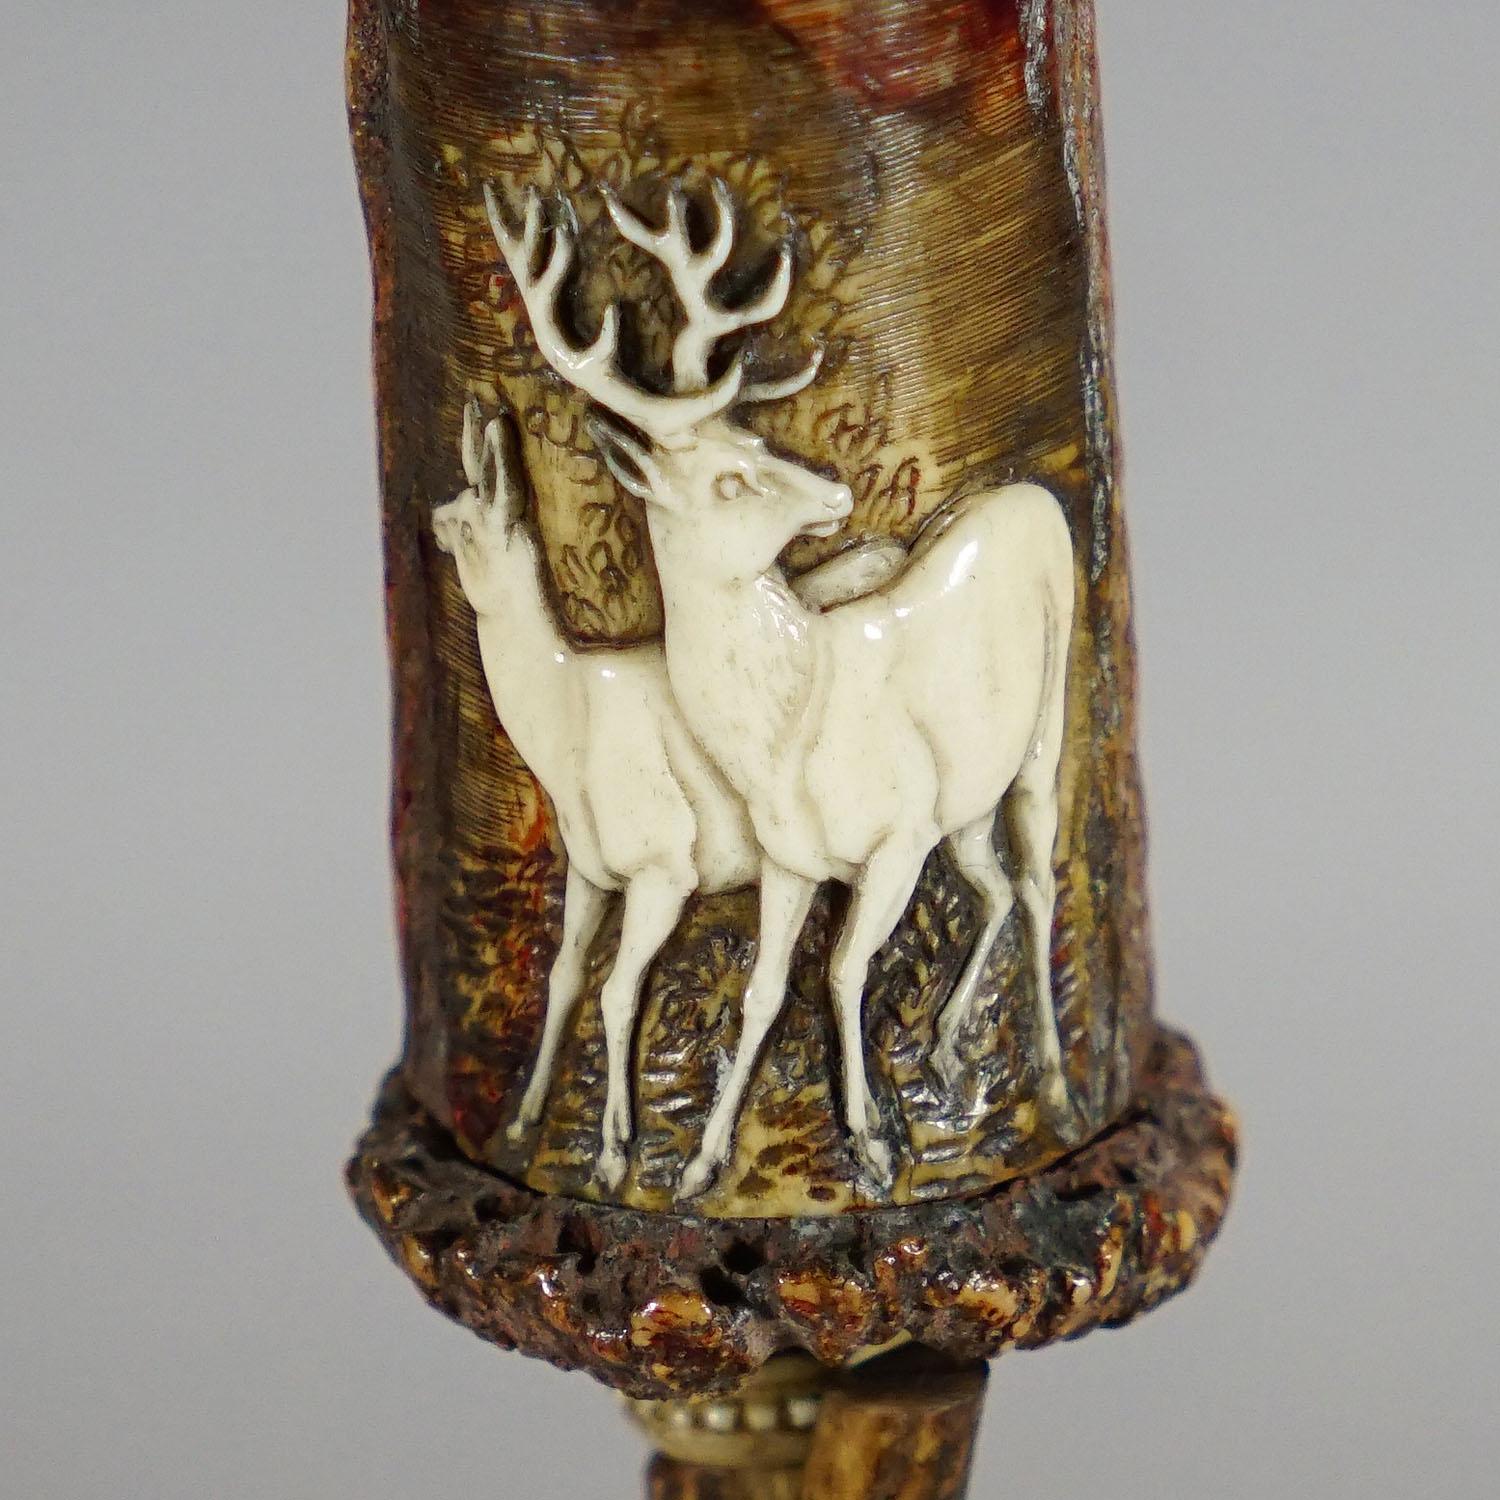 Stylish Cabin Decor Antler Candle Holder with Deer Carving, Germany ca. 1900 For Sale 1